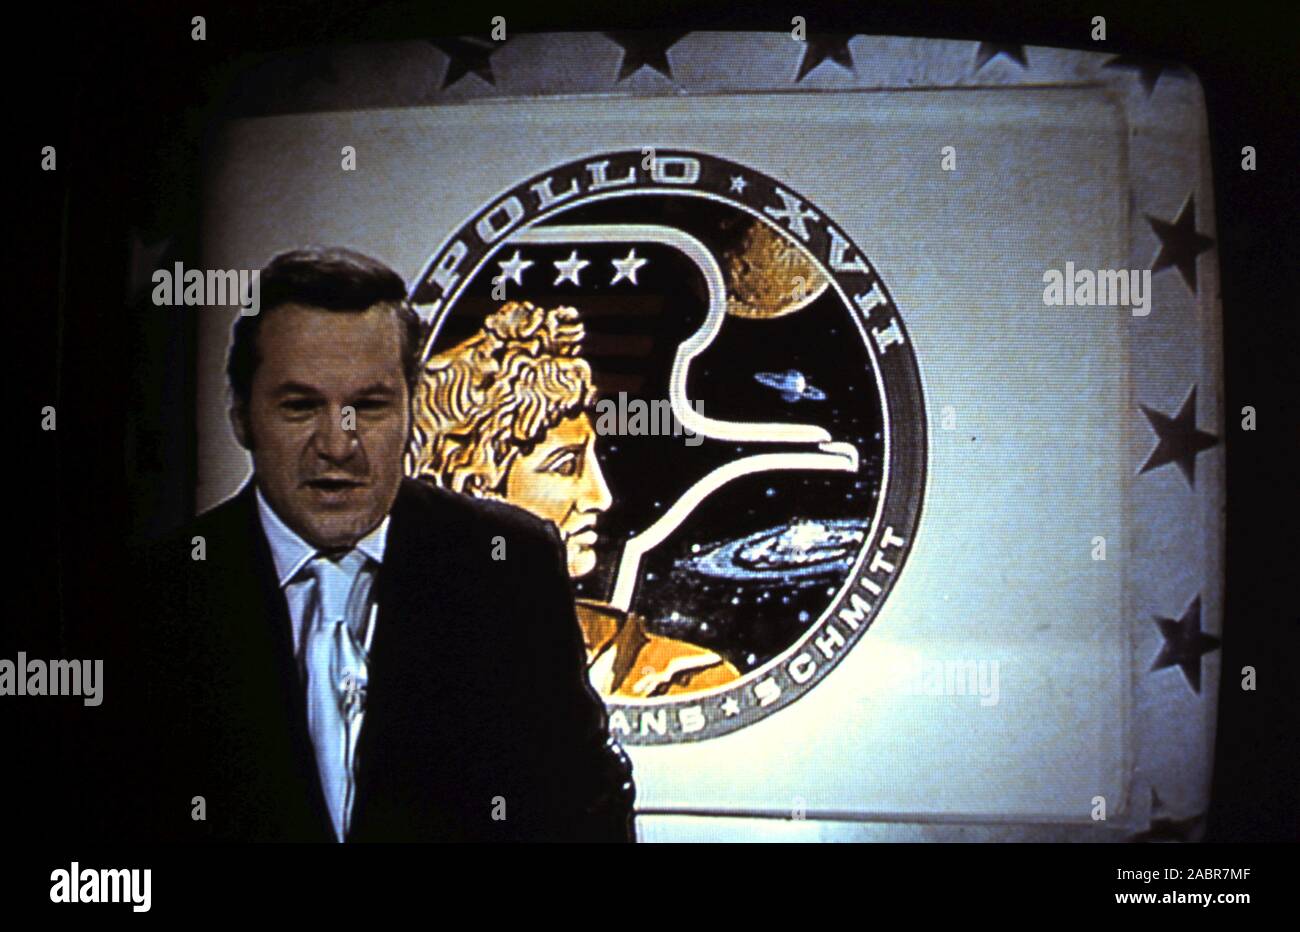 Teleclip - 'Reggie' Bosanquet British broadcaster for ITN presenting the Apollo 17 Moon Landing - photograph taken directly from color TV screen during live broadcast in the UK - 1972 Stock Photo